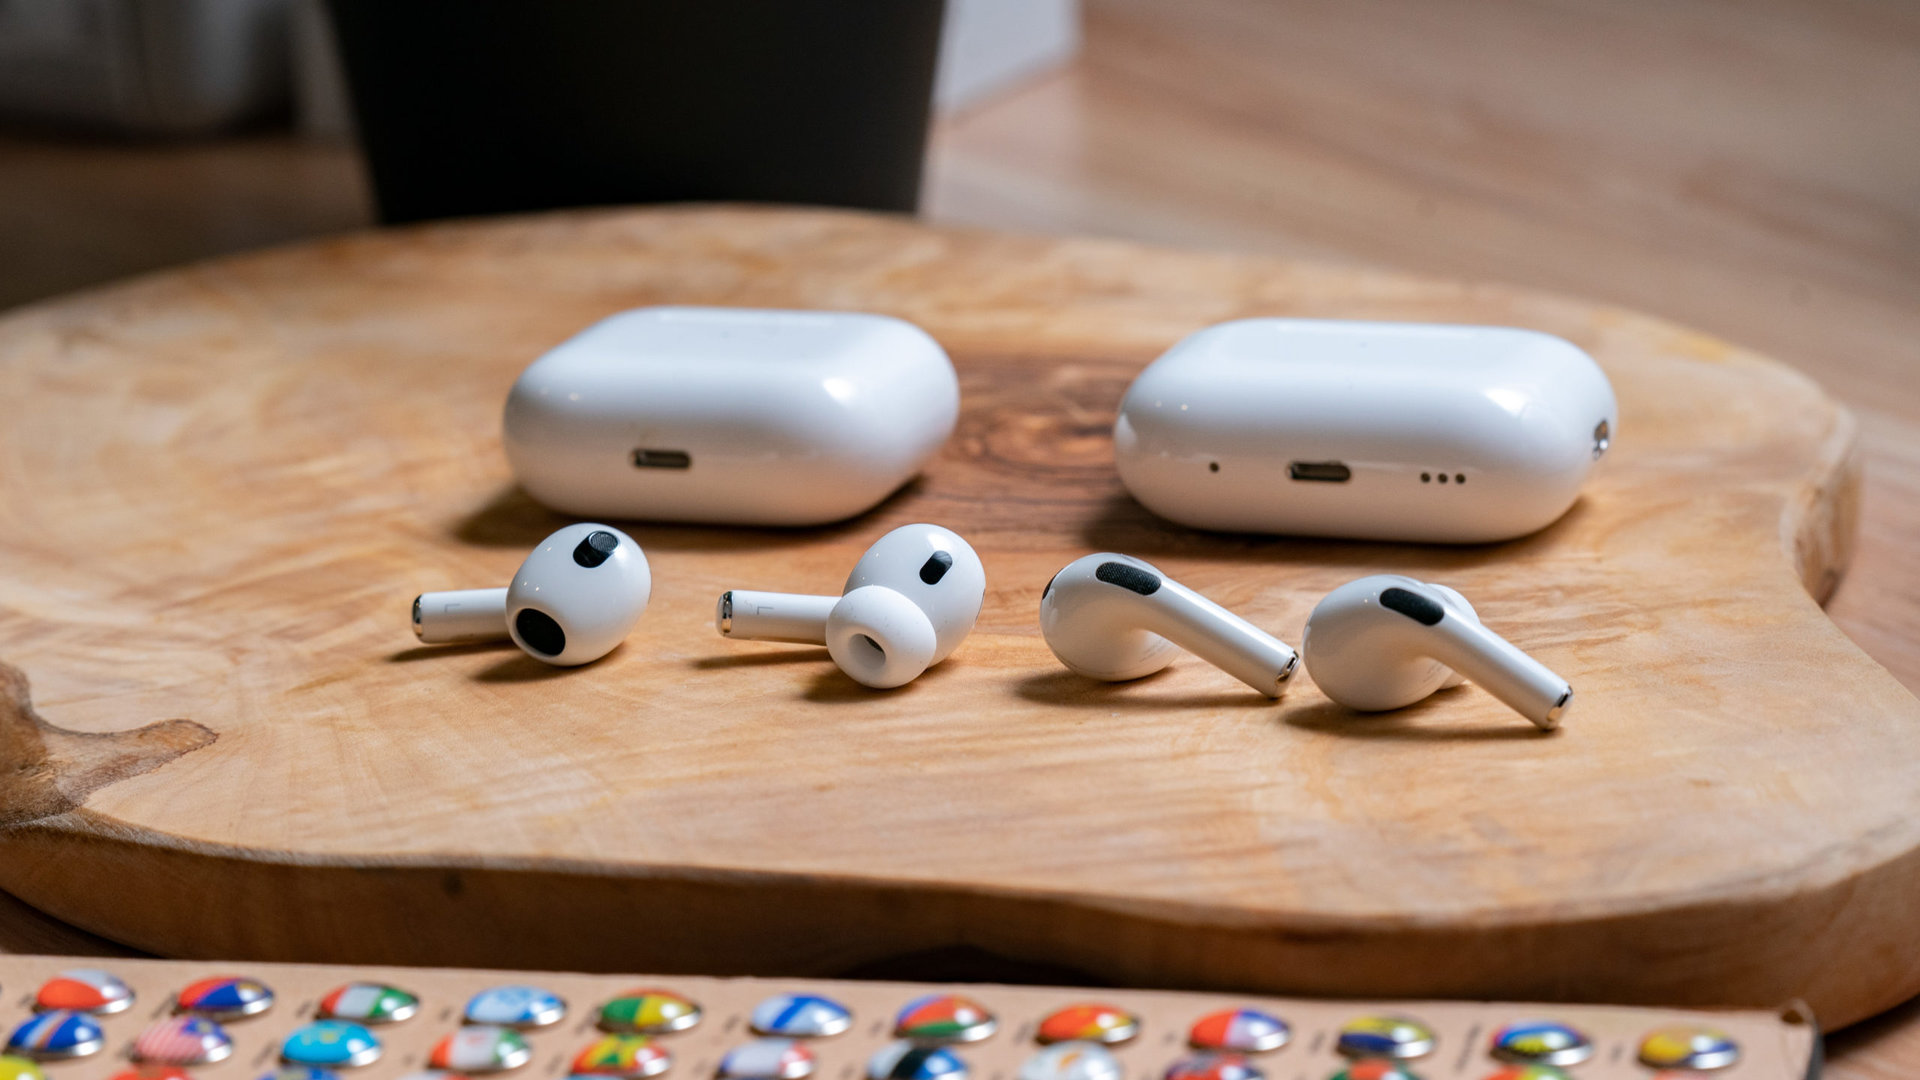 Apple Airpods Pro 2nd generation vs Apple Airpods 3rd generation case and earbuds comparison